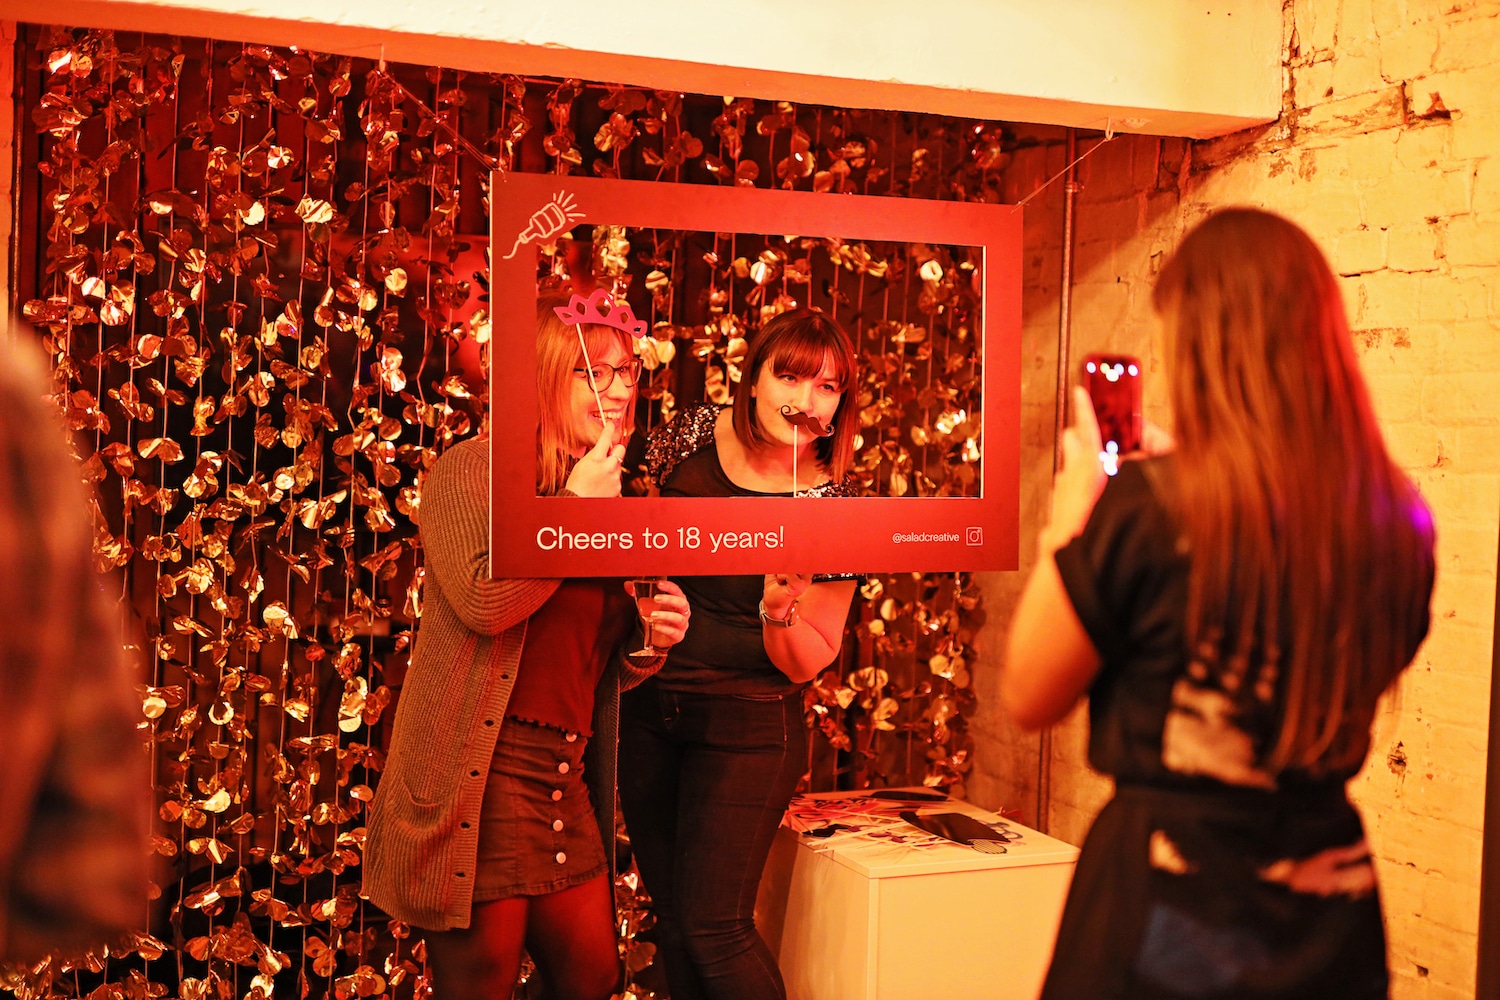 A woman taking a photo of two guests posing behind the photo frame